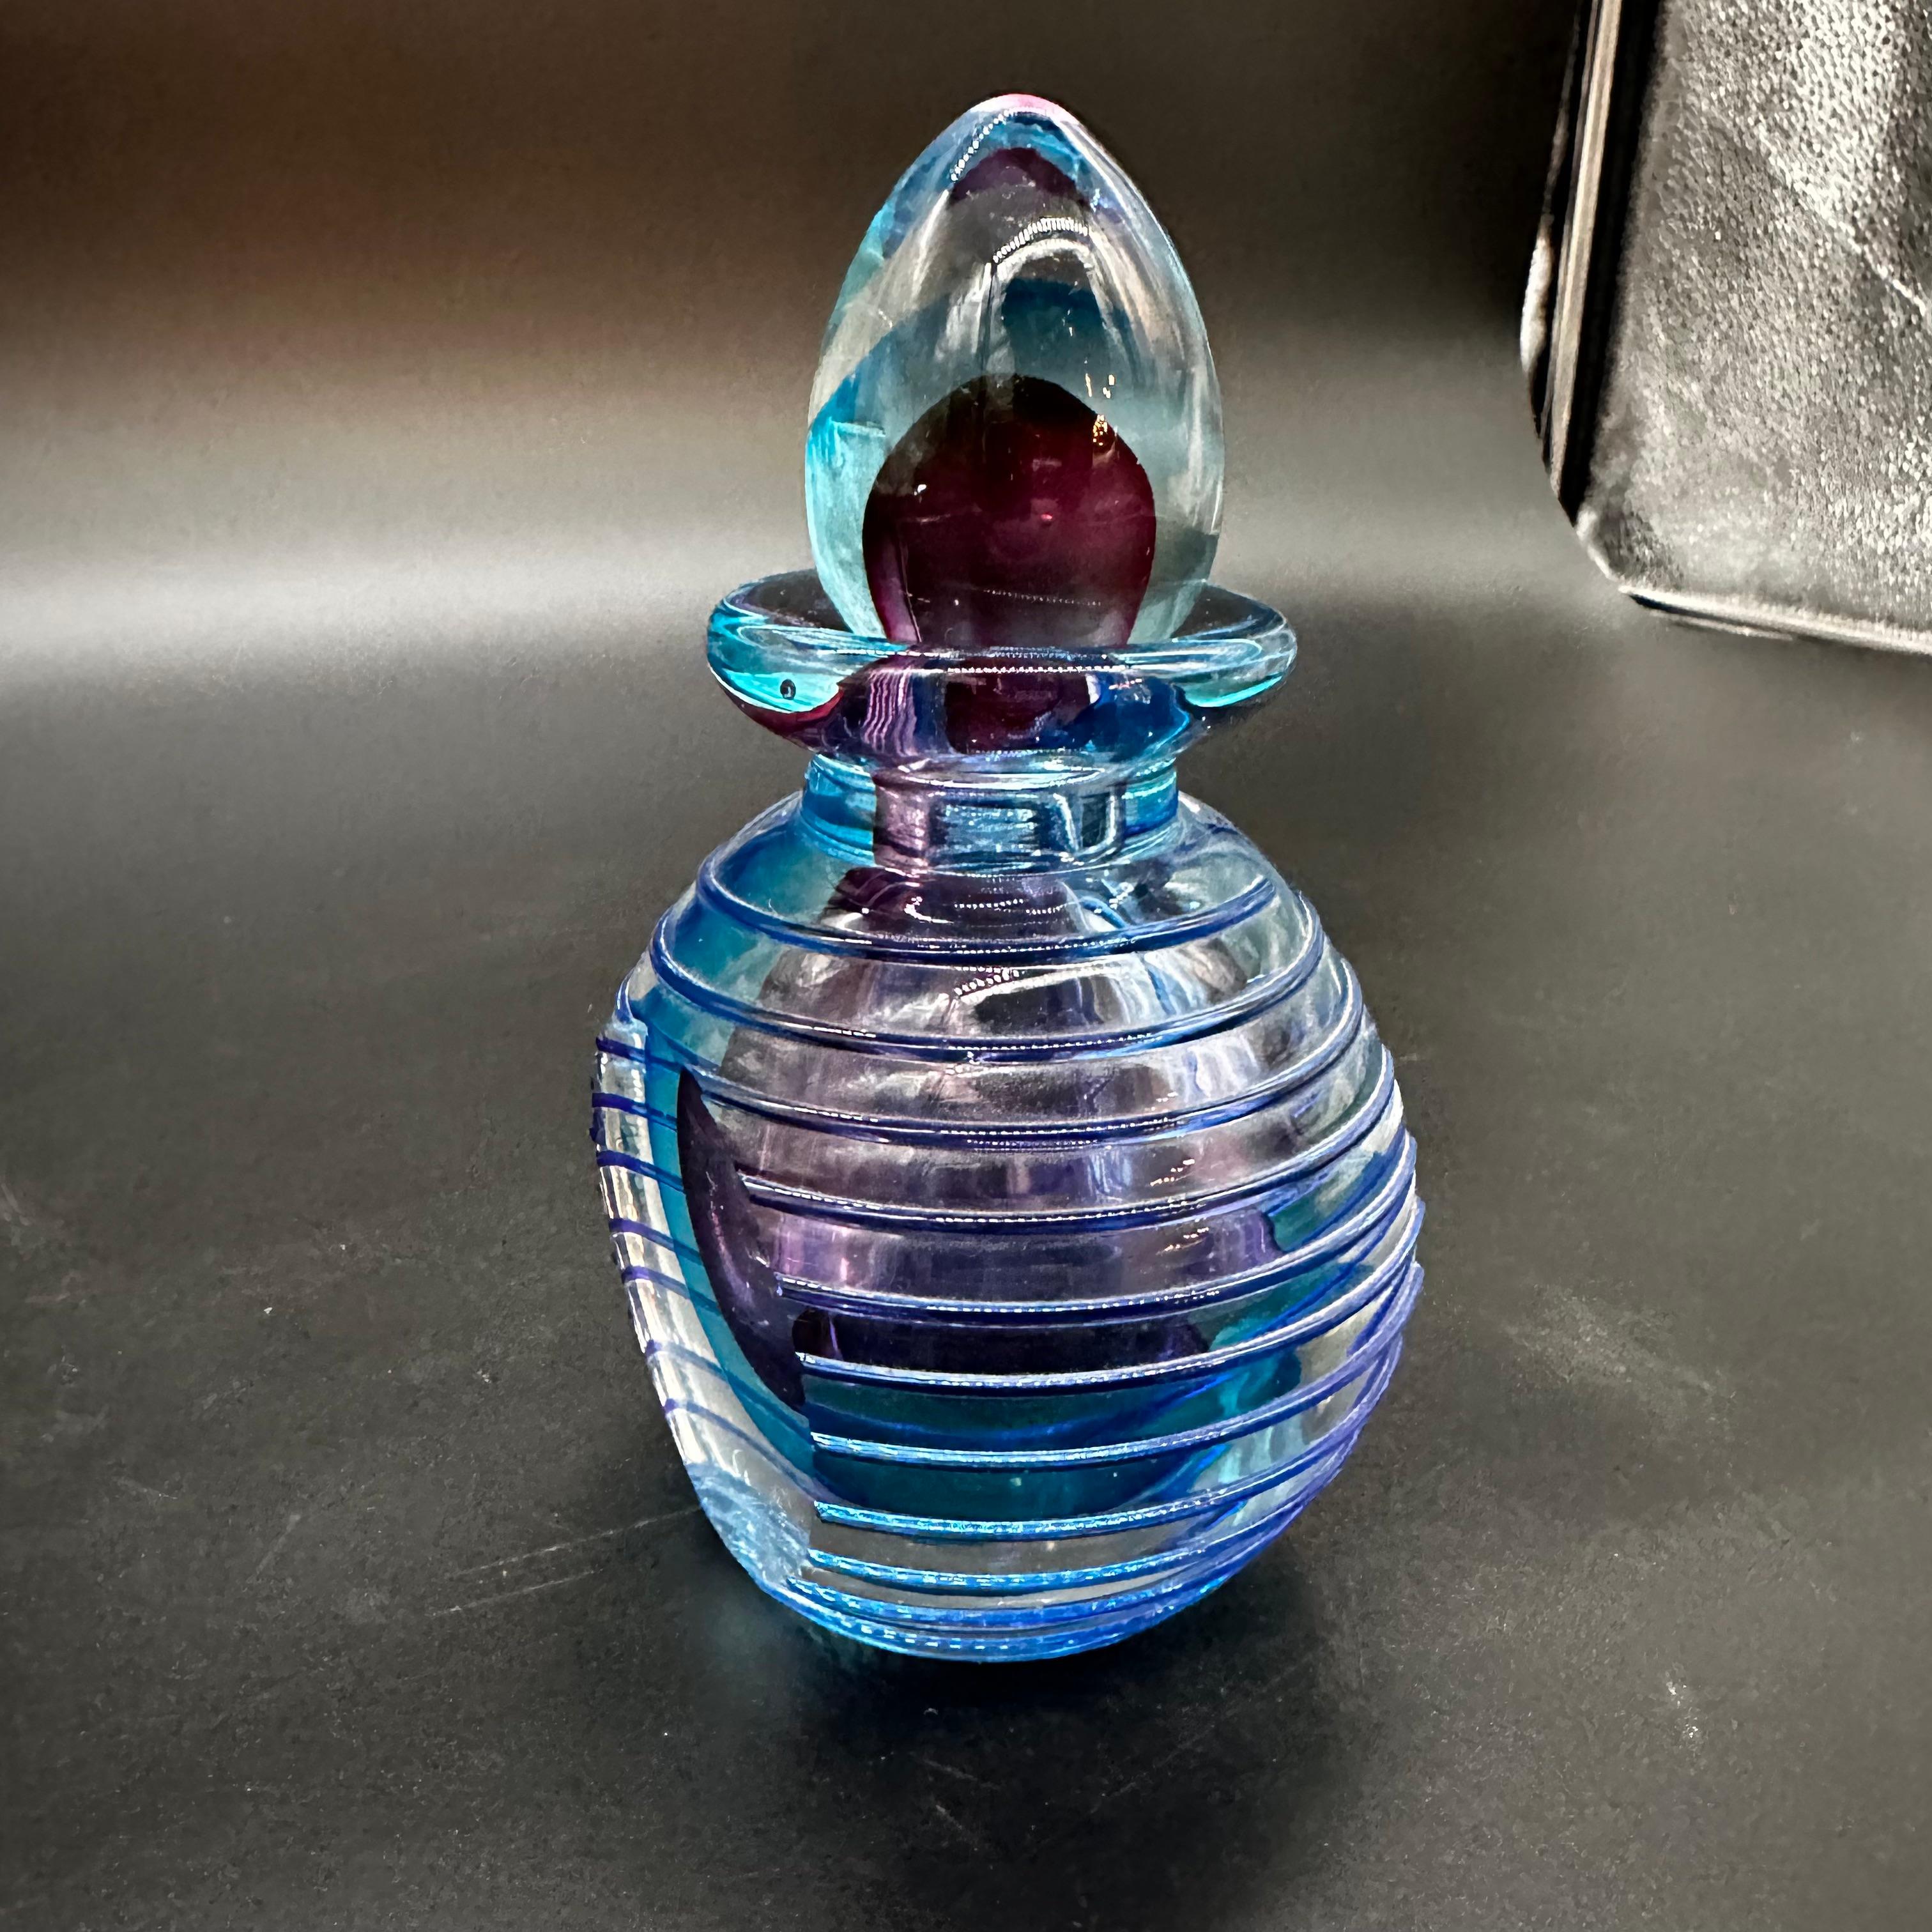 A vintage Italian decorative handmade glass bottle from the 1960s is a beautifully crafted glass vessel originating from Italy during that era. It likely boasts intricate designs and vibrant colors, showcasing the exquisite artistry of Italian